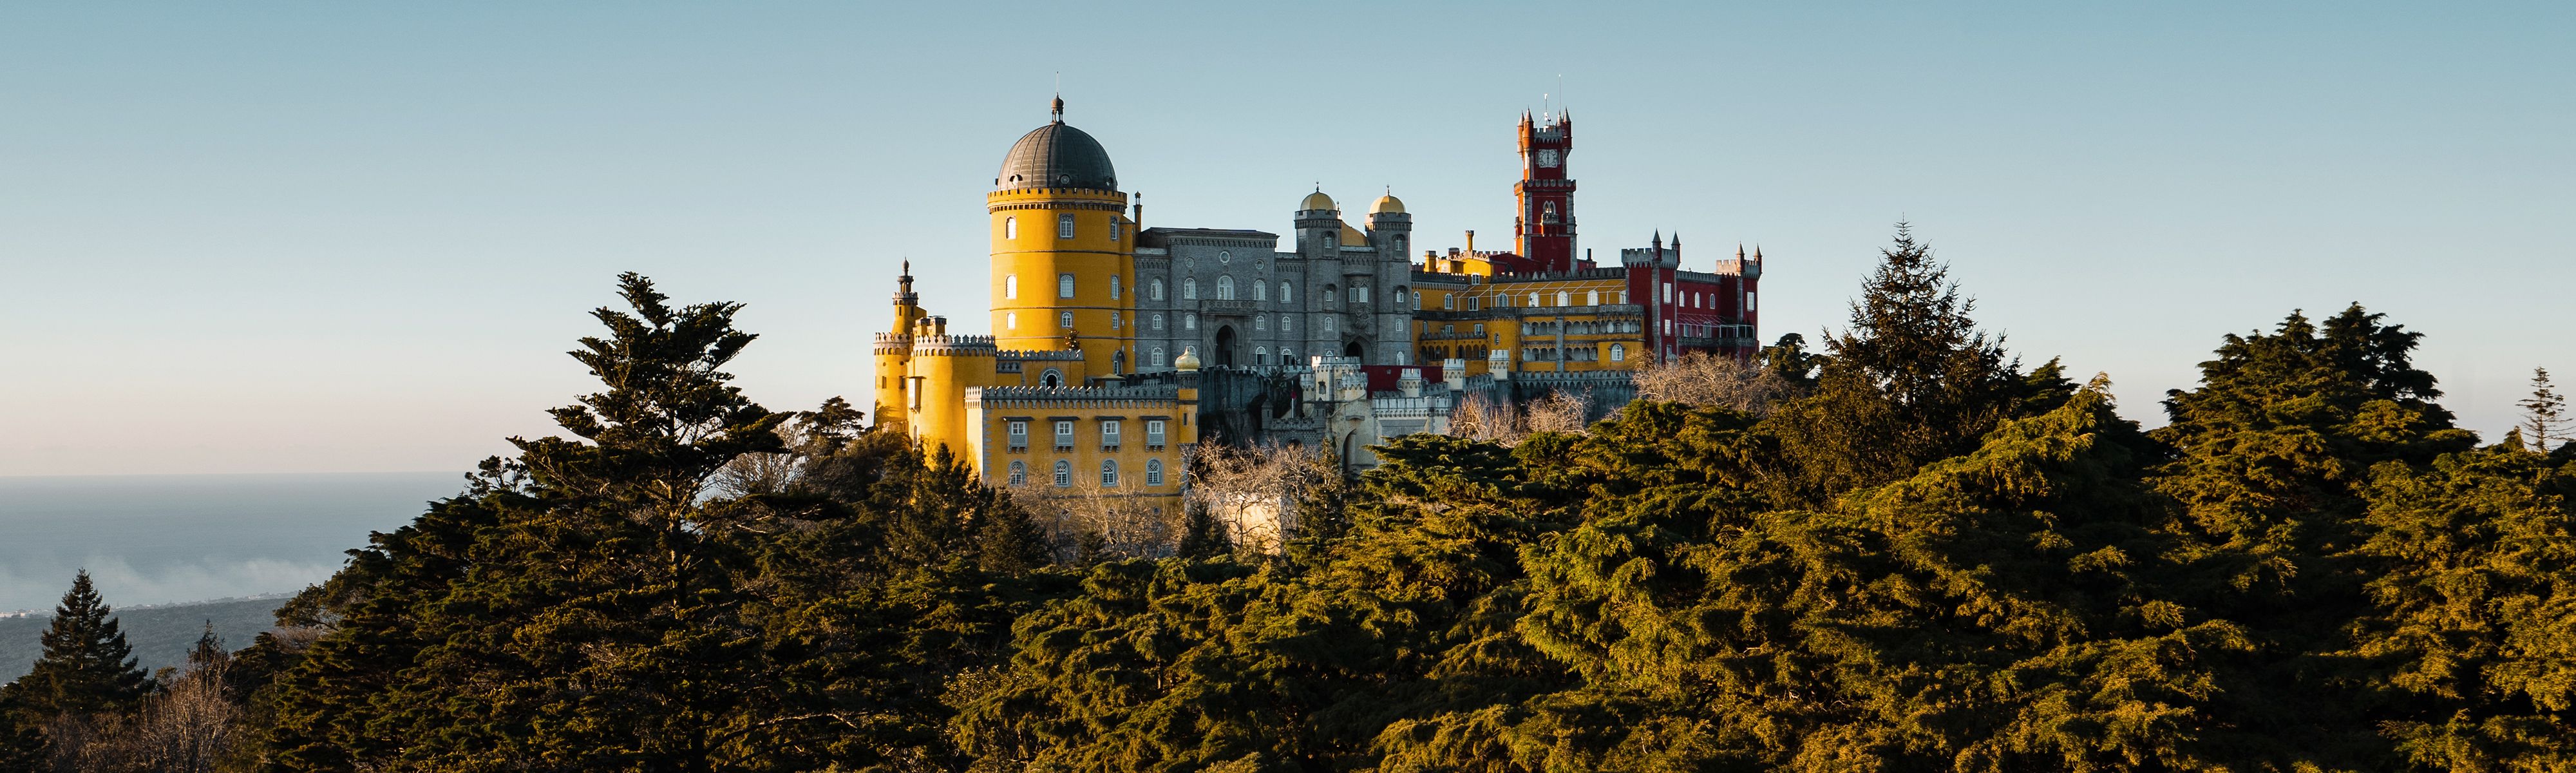 yellow purple and red pena palace surrounded by lush trees in sintra portugal